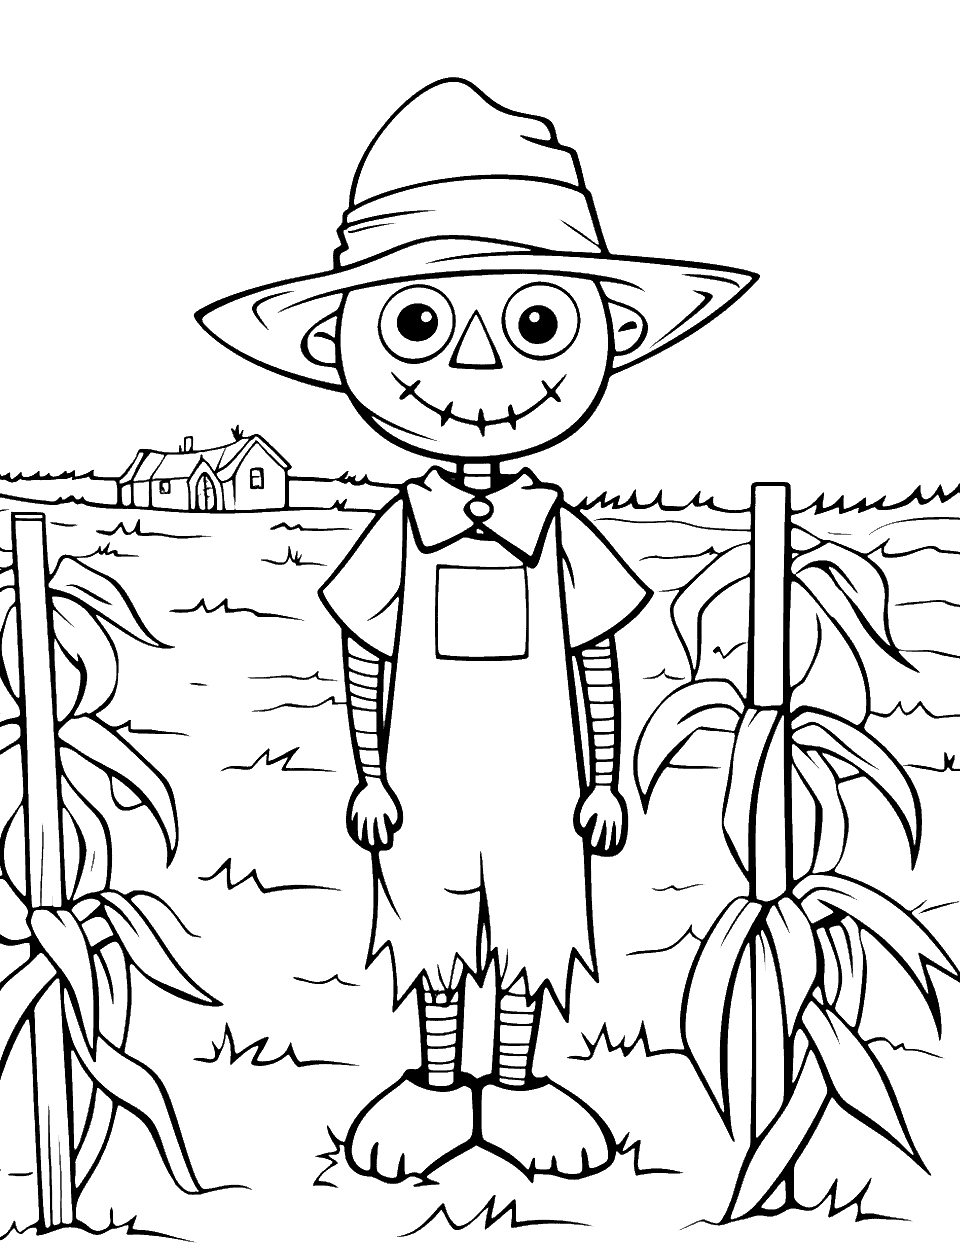 Scarecrow in the Field Farm Coloring Page - A scarecrow standing in a field.